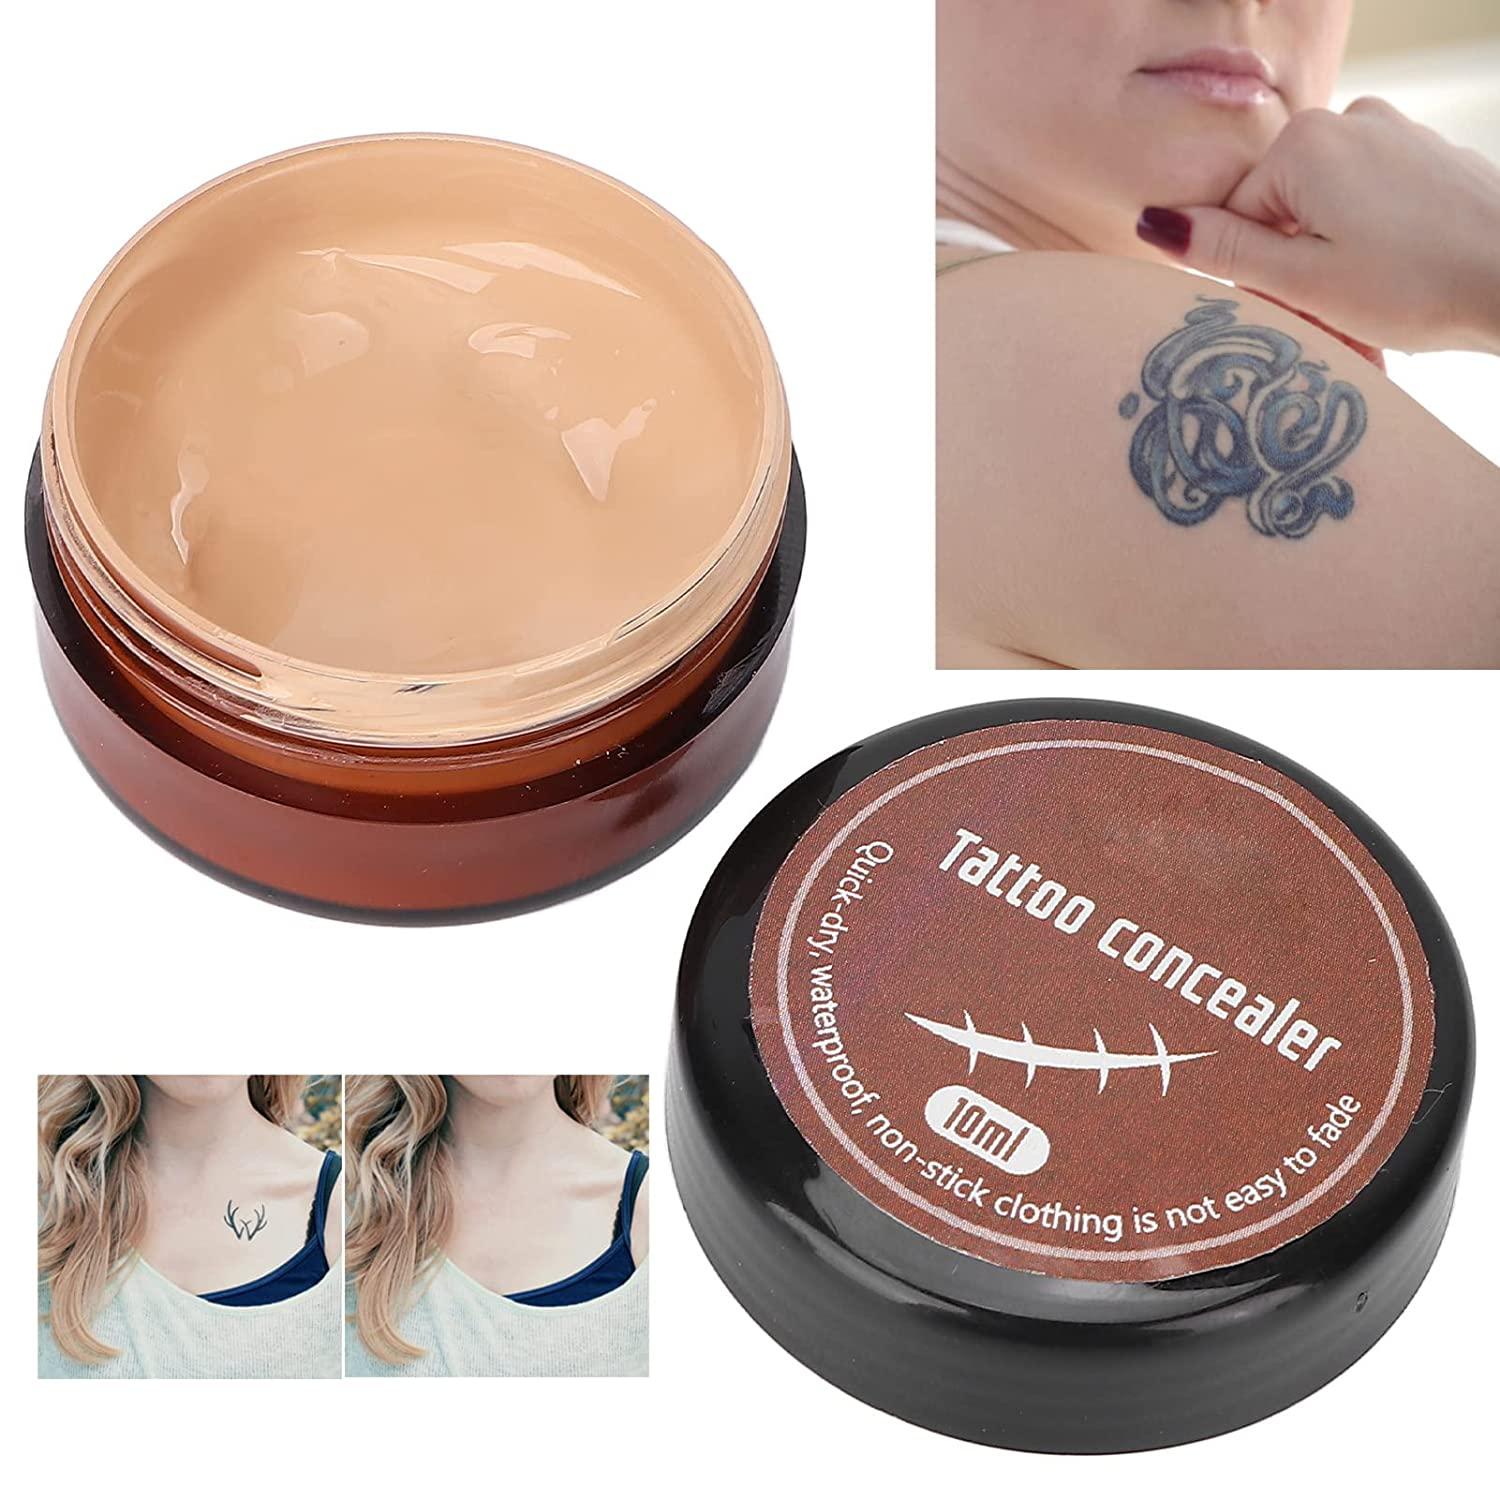 Tattoo Concealer, Waterproof Skin Marks Freckles Scars Cover Concealers Tattoo Cover Makeup Hiding Spots Birthmarks Concealer Makeup Cover Cream Up Cream for Men Women on Body 10ml Beige 64 (